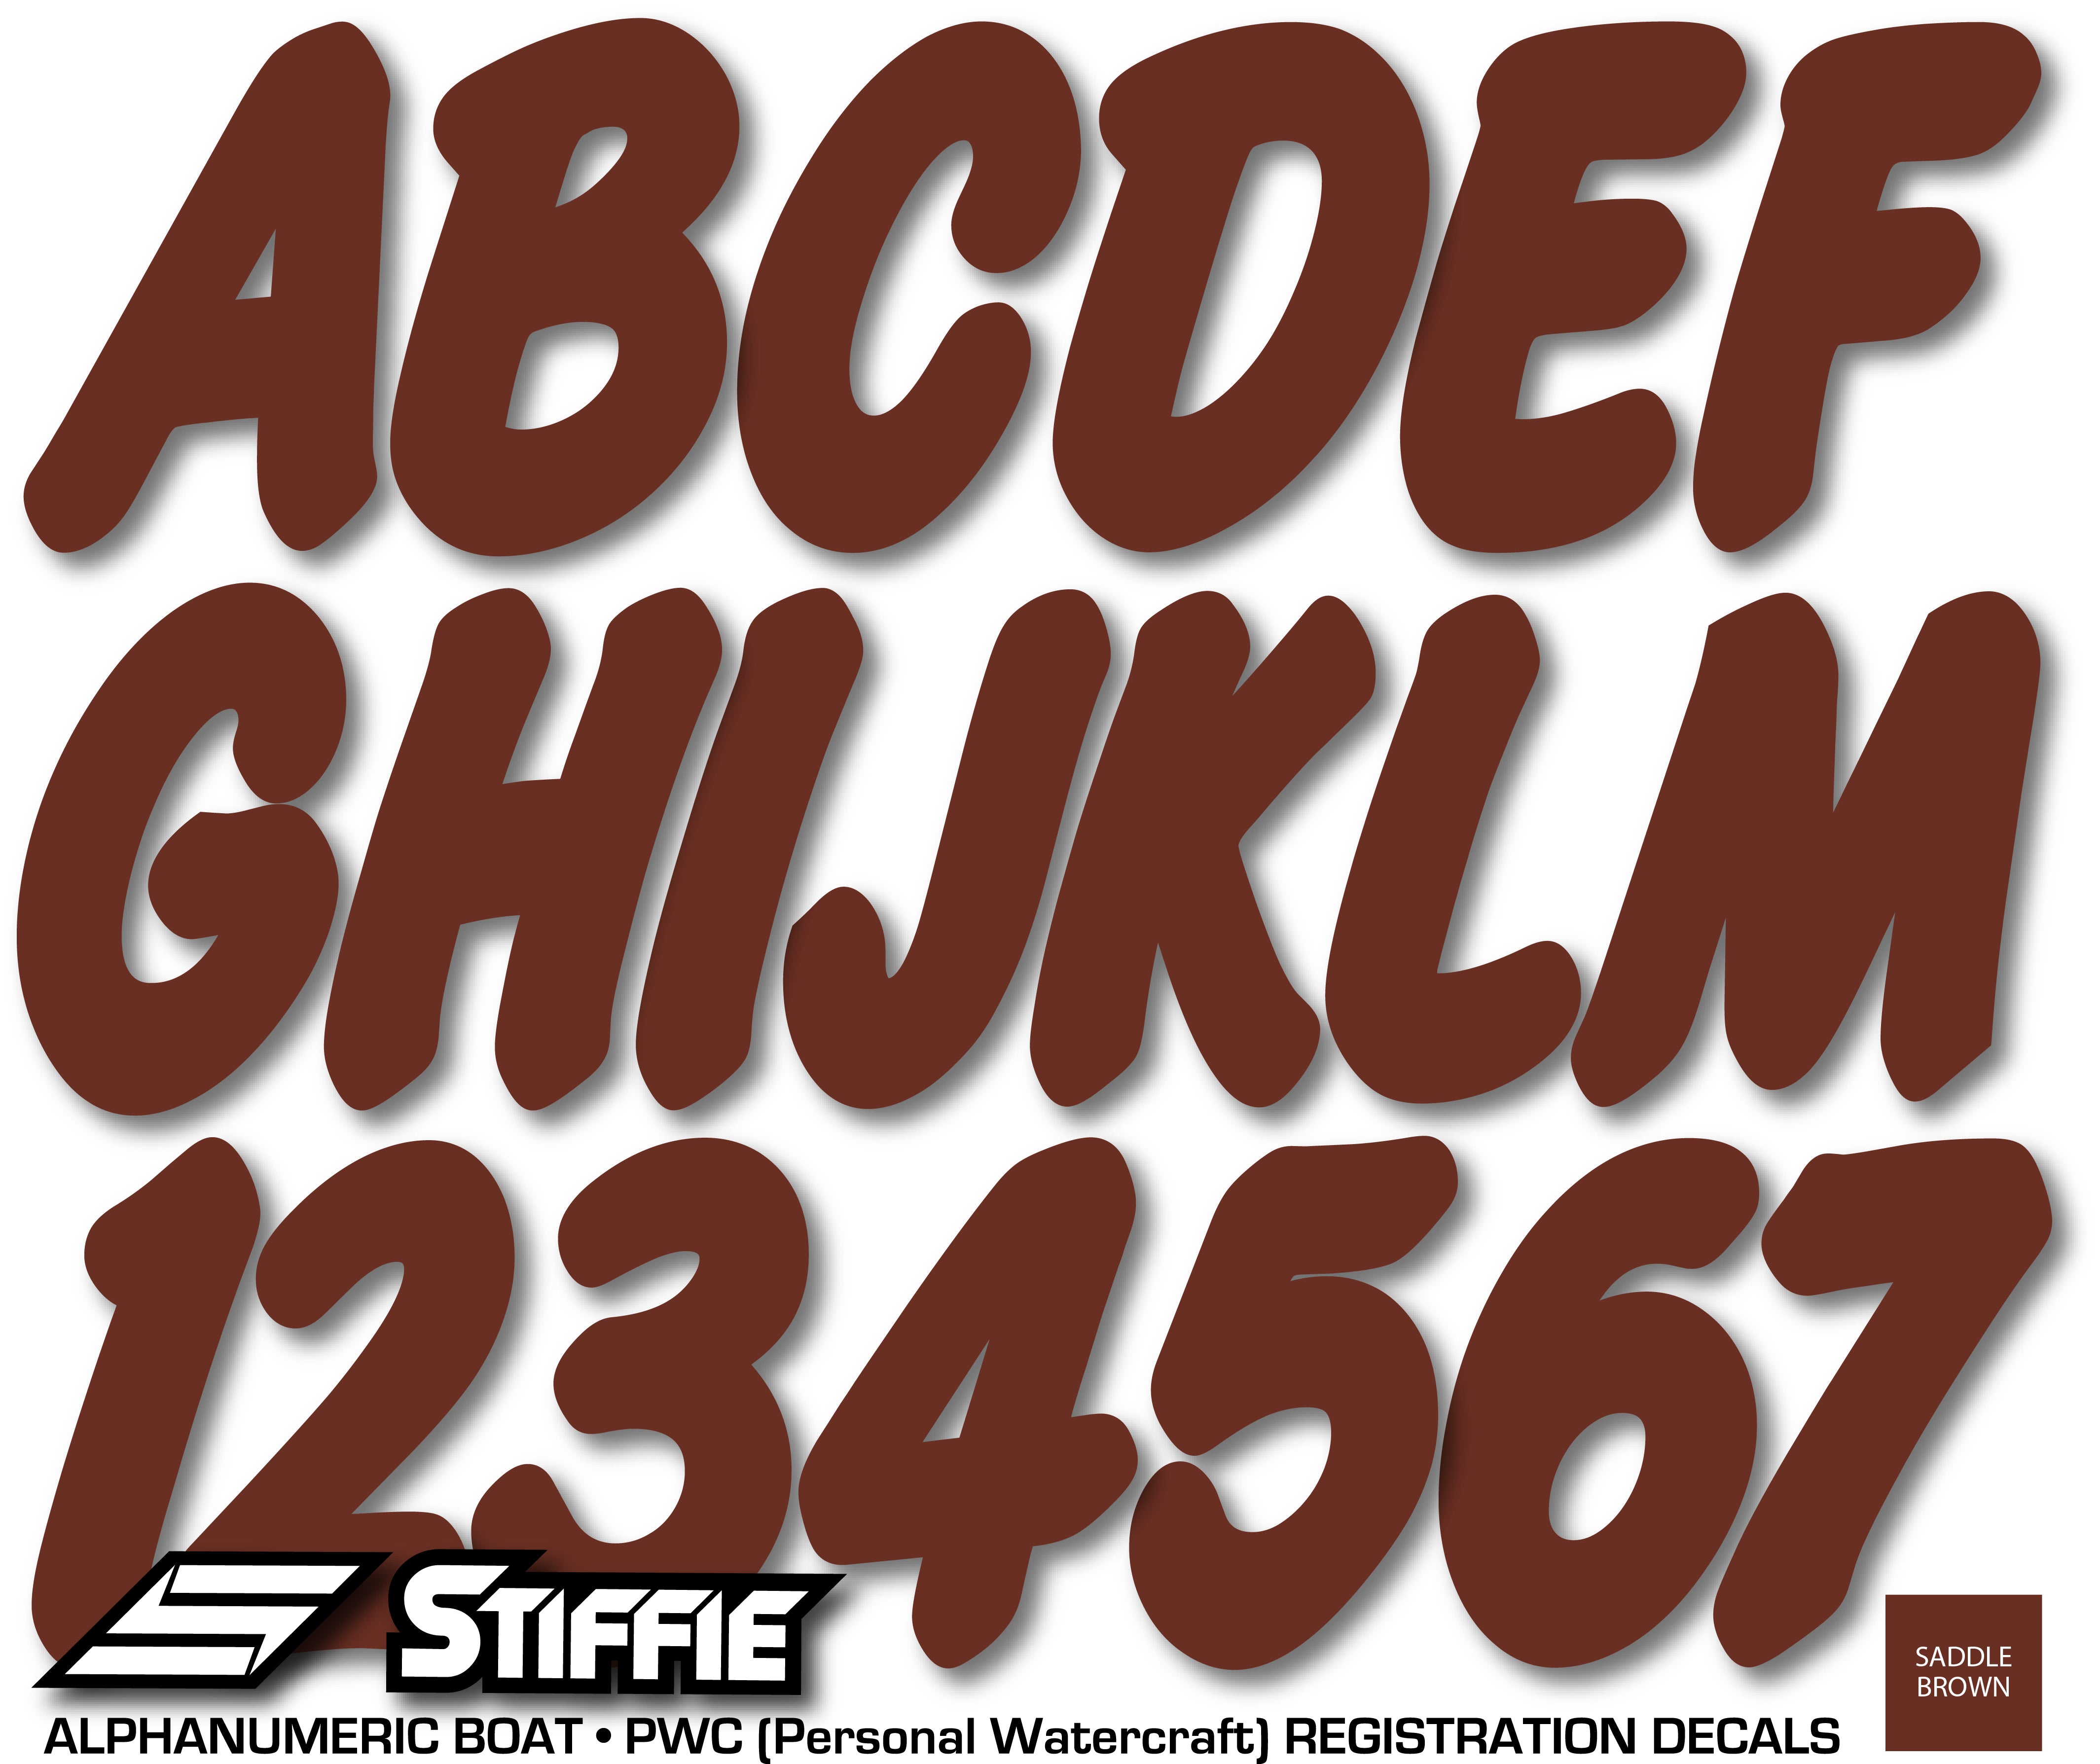 STIFFIE Whip-One Saddle Brown 3" Alpha-Numeric Registration Identification Numbers Stickers Decals for Boats & Personal Watercraft